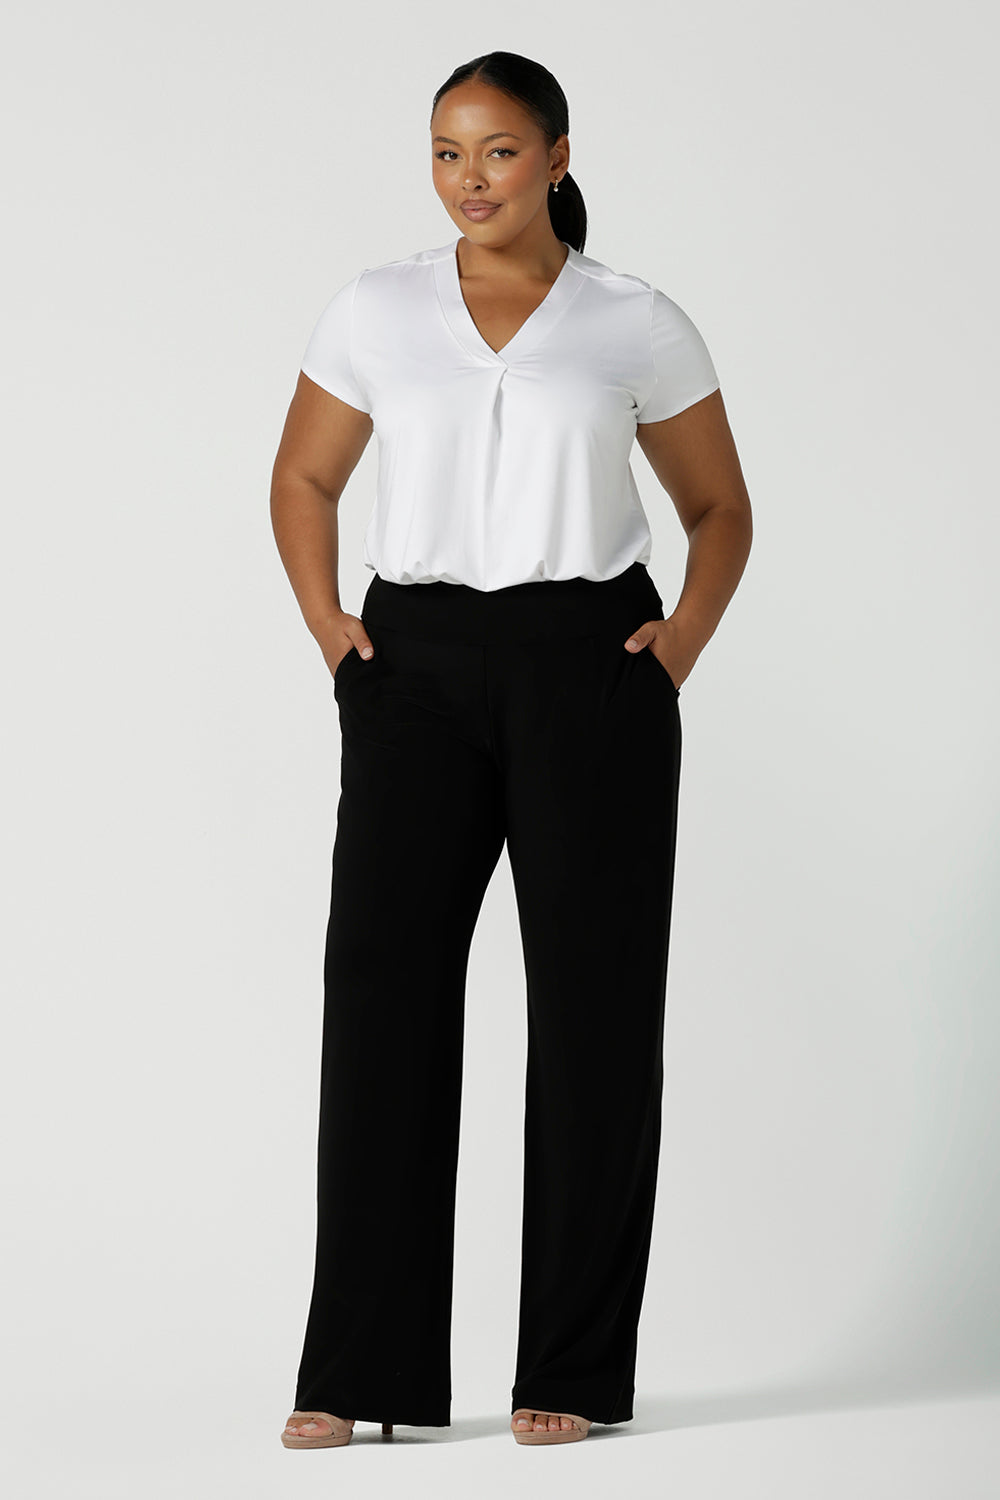 Tall woman curvy size 16 model wears Monroe Tall pants. Great work pants for tall women. Comfortable work pants in black jersey. Made in Australia size 8 - 24.